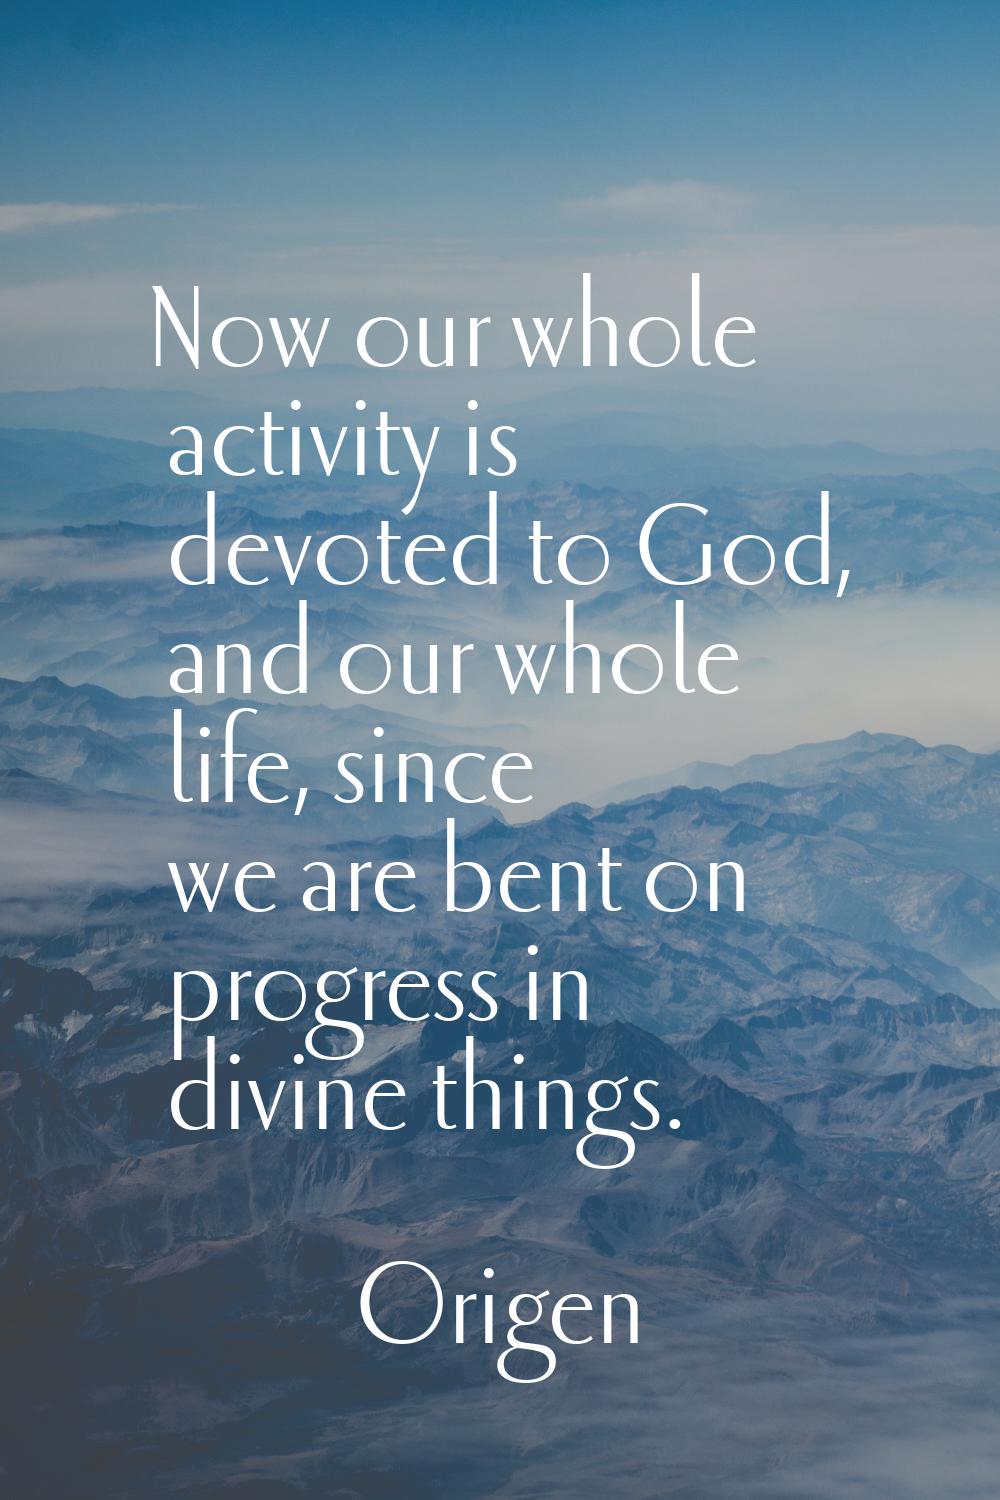 Now our whole activity is devoted to God, and our whole life, since we are bent on progress in divi